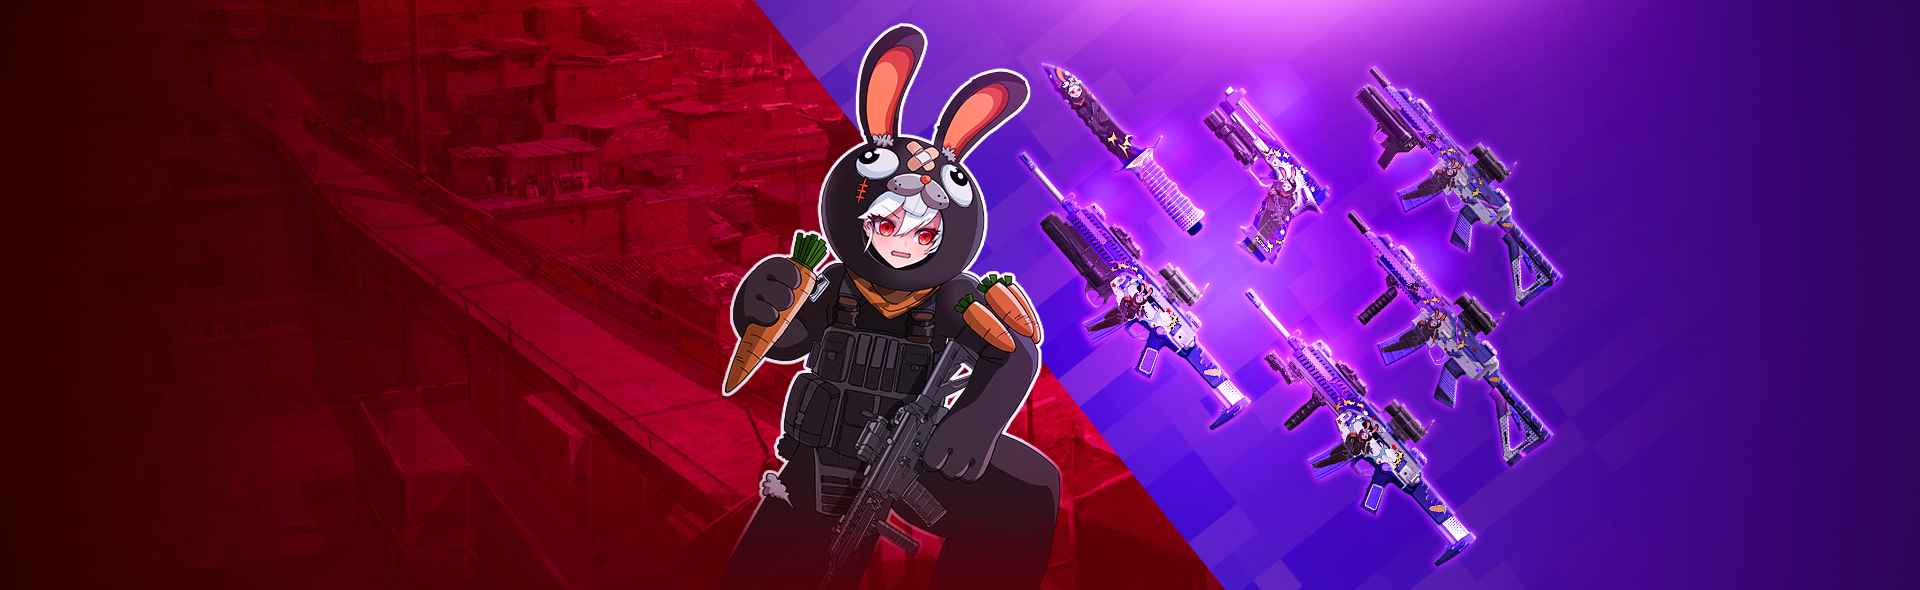 Weapon Skin UPDATE!<br />Rabbit Commando<br />January 5th ~ February 2nd<br /><br />The [BLACK RABBIT] series have arrived to commemorate the Year of the Black Rabbit.